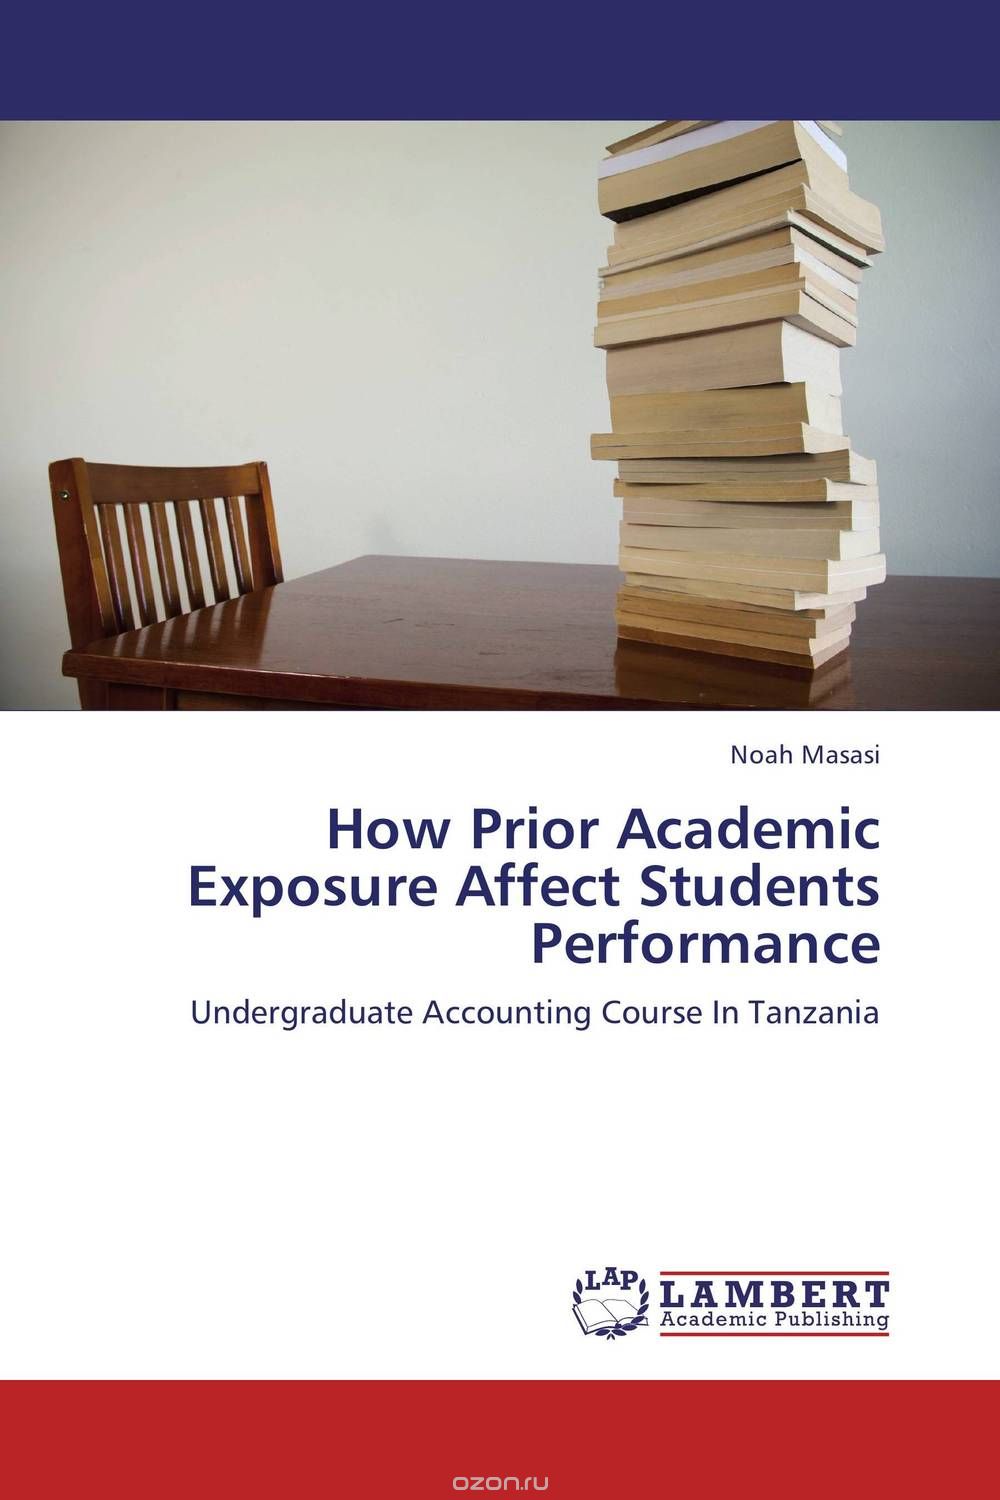 How Prior Academic Exposure Affect Students Performance